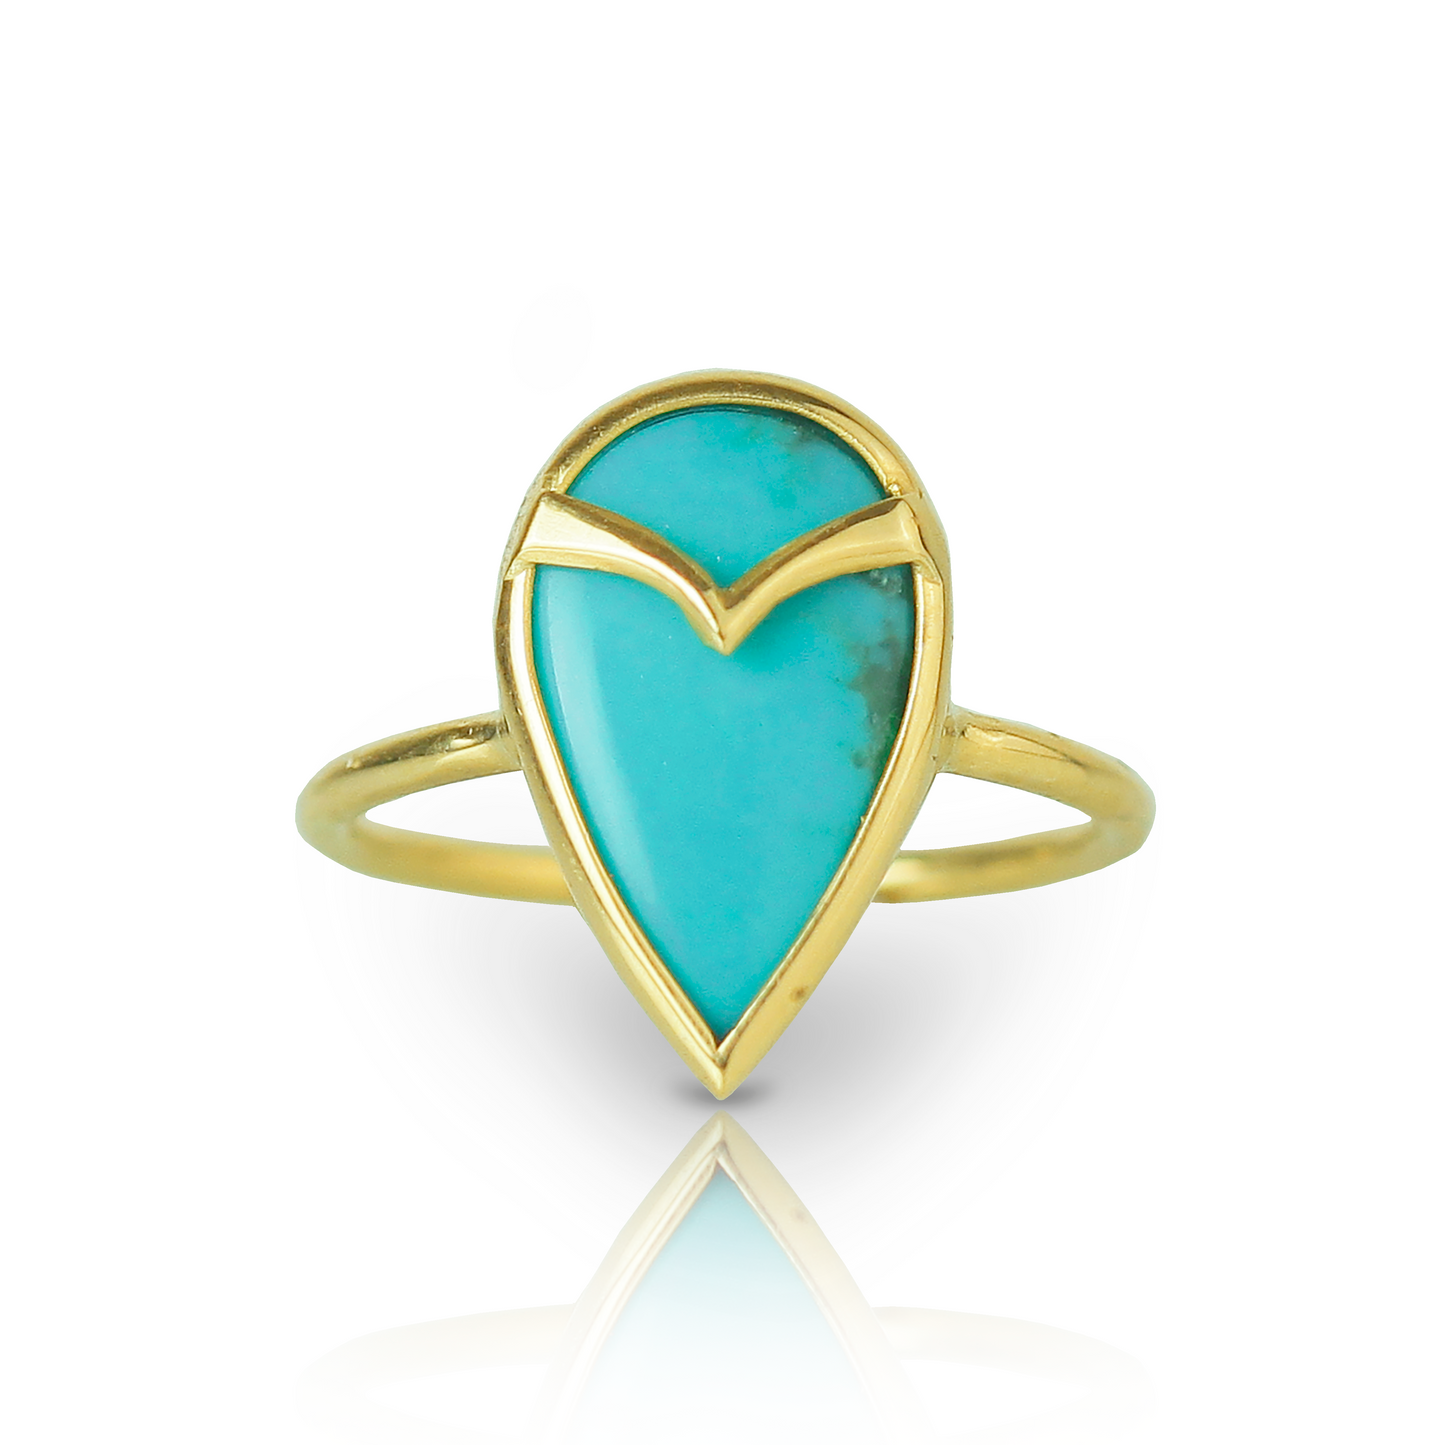 Yellow gold ring with a teardrop-shaped turquoise stone, and gold owl beak detail